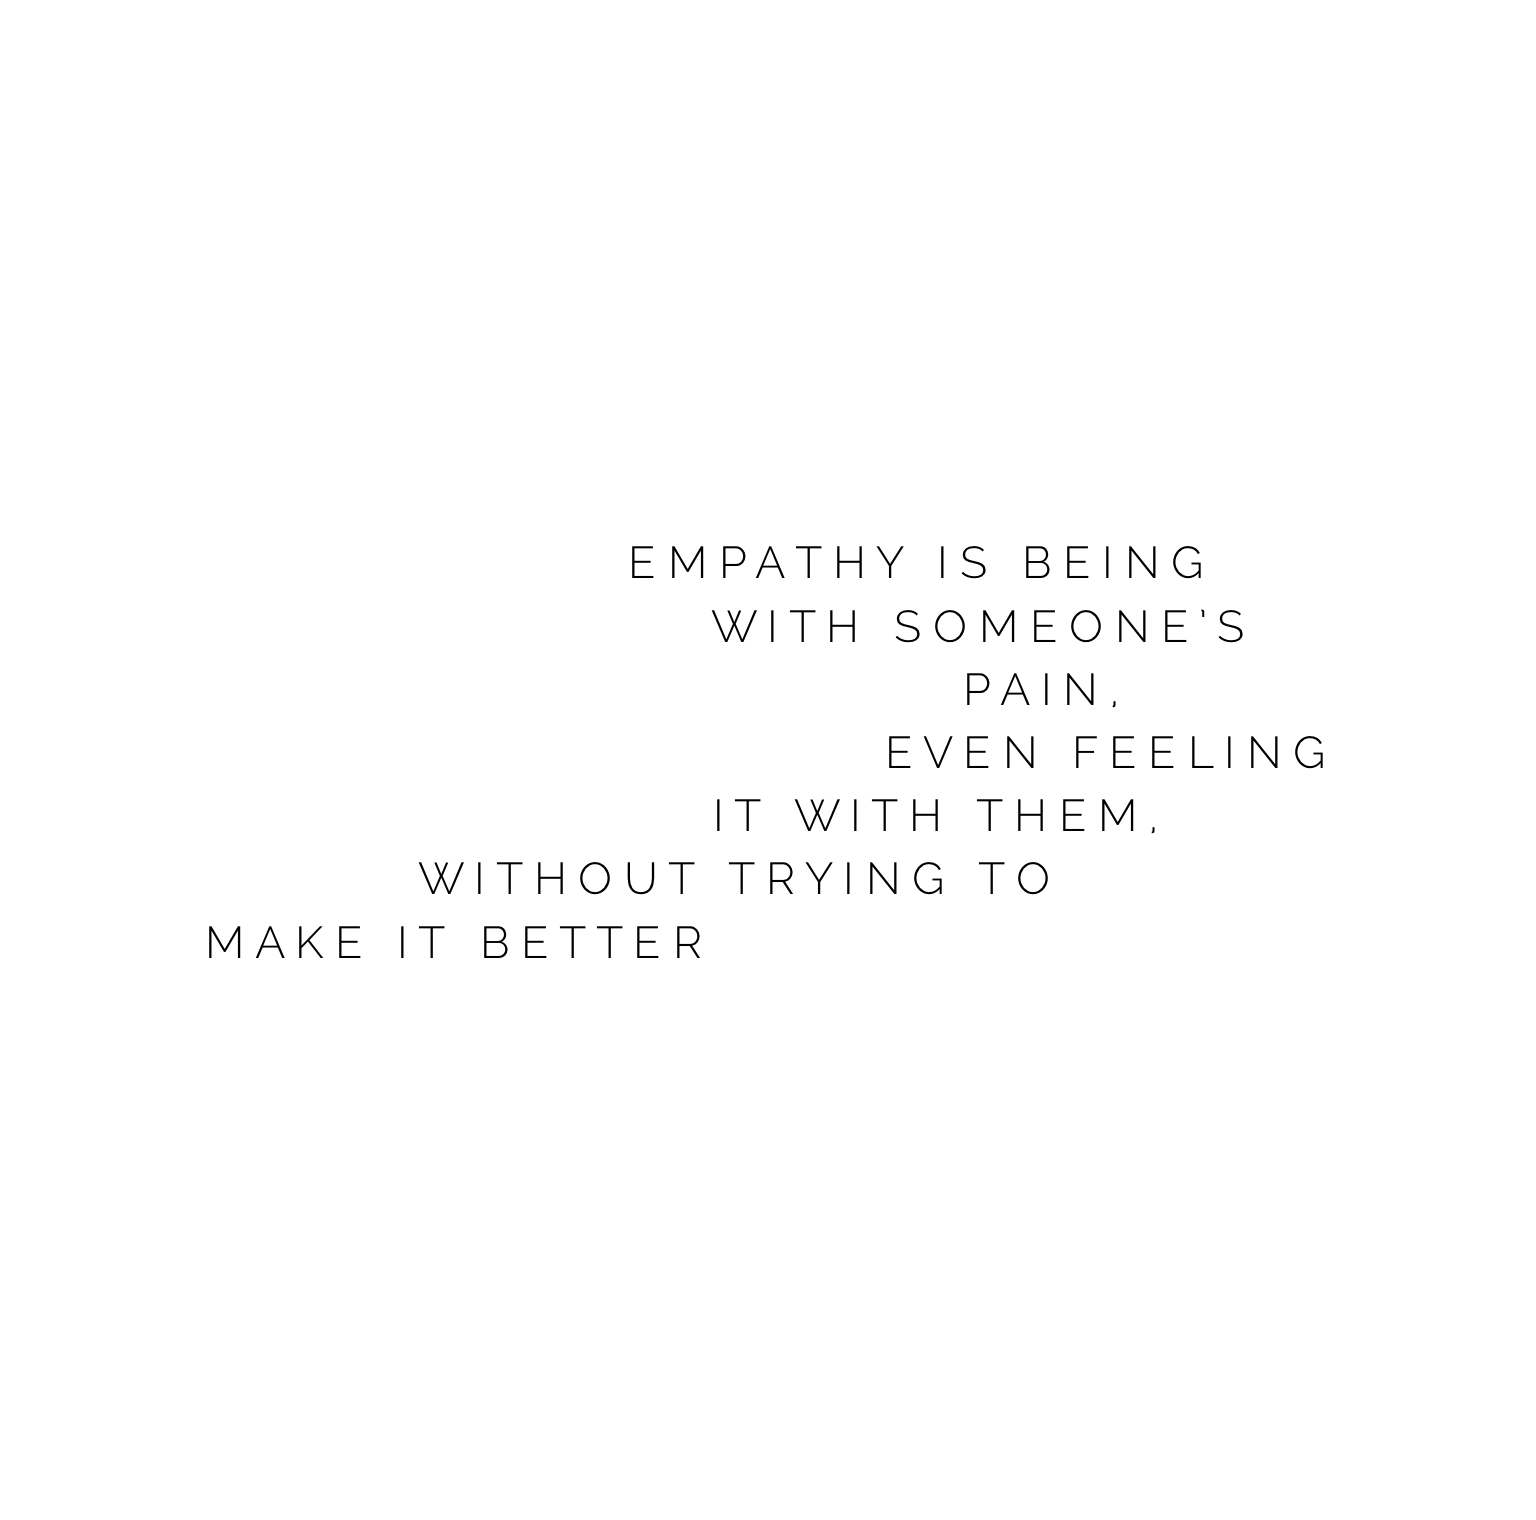 Grateful for those who listen with empathy 